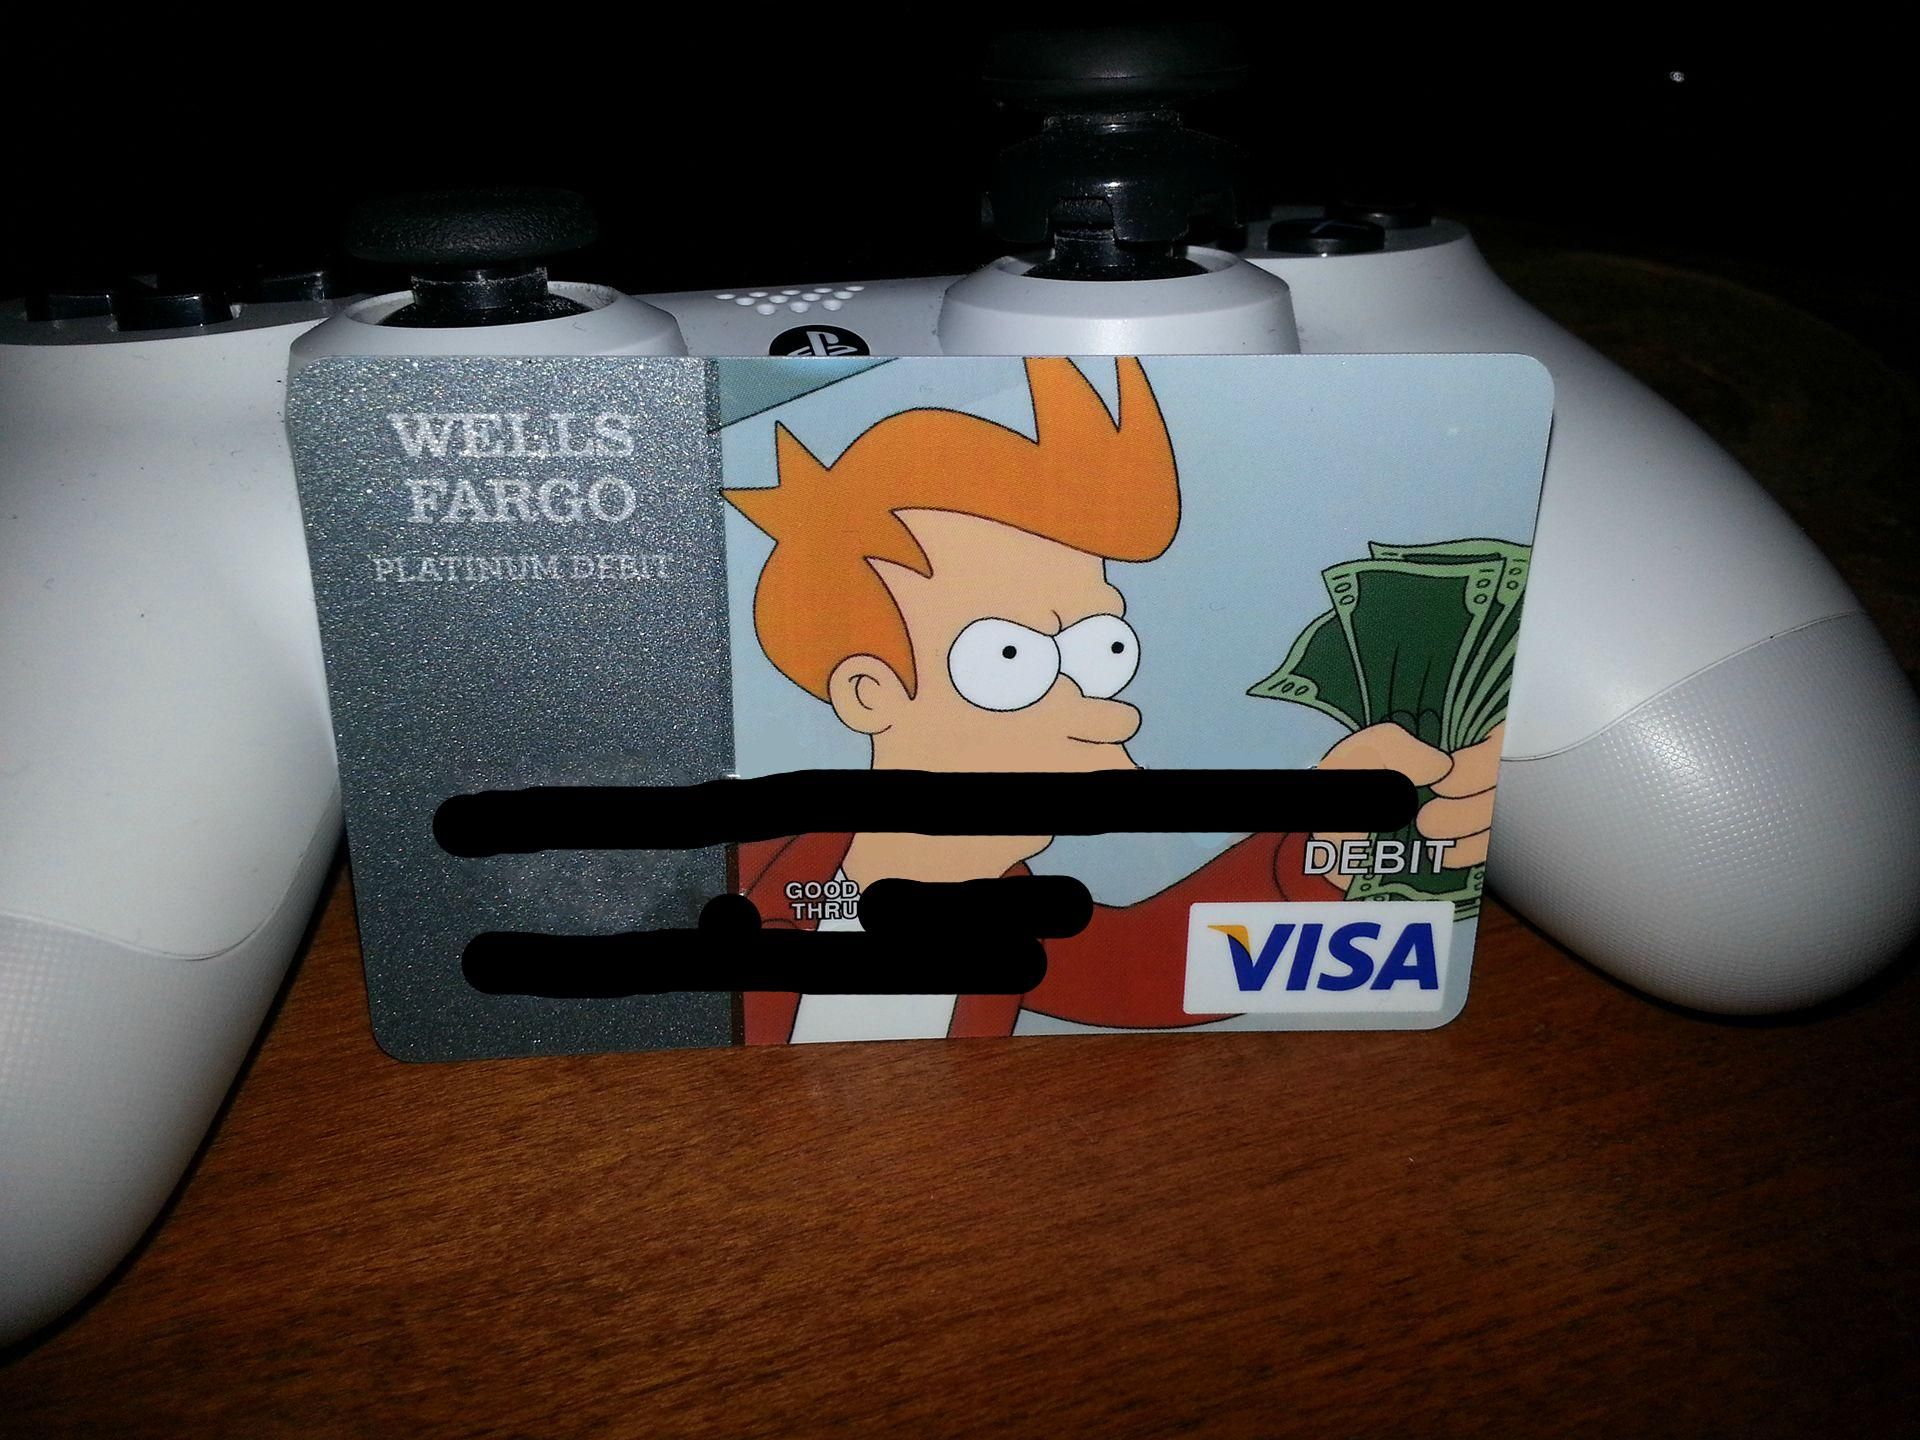 My Bank Finally Accepted My Card Design!